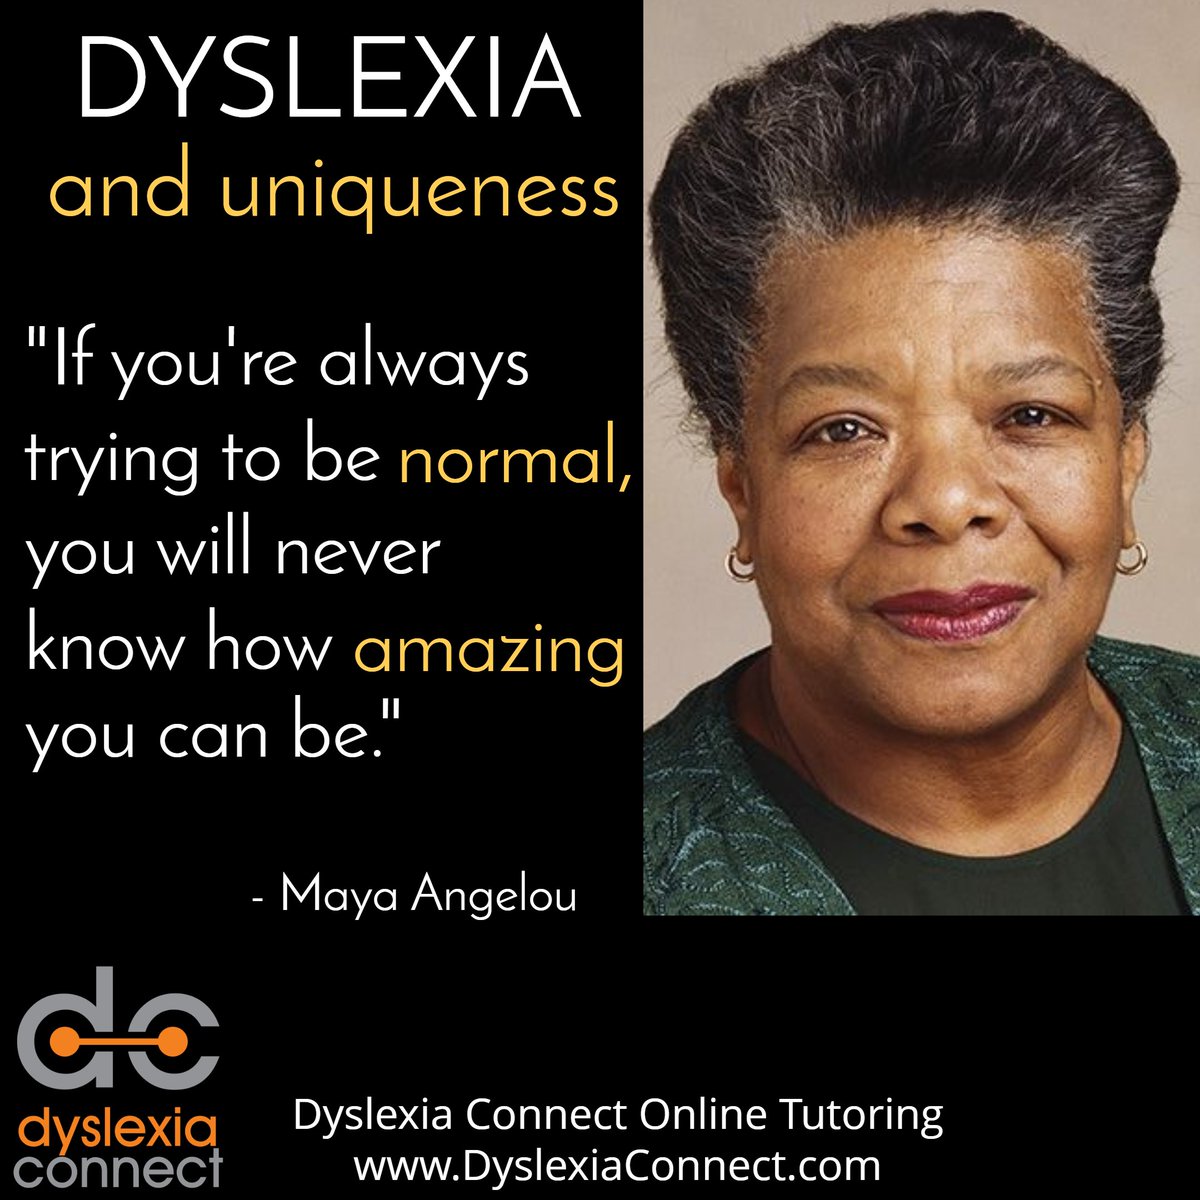 An inspiring quote from Maya Angelou. We need to encourage kids with dyslexia to embrace their uniqueness! DyslexiaConnect.com #dyslexia #ADHD #dysgraphia